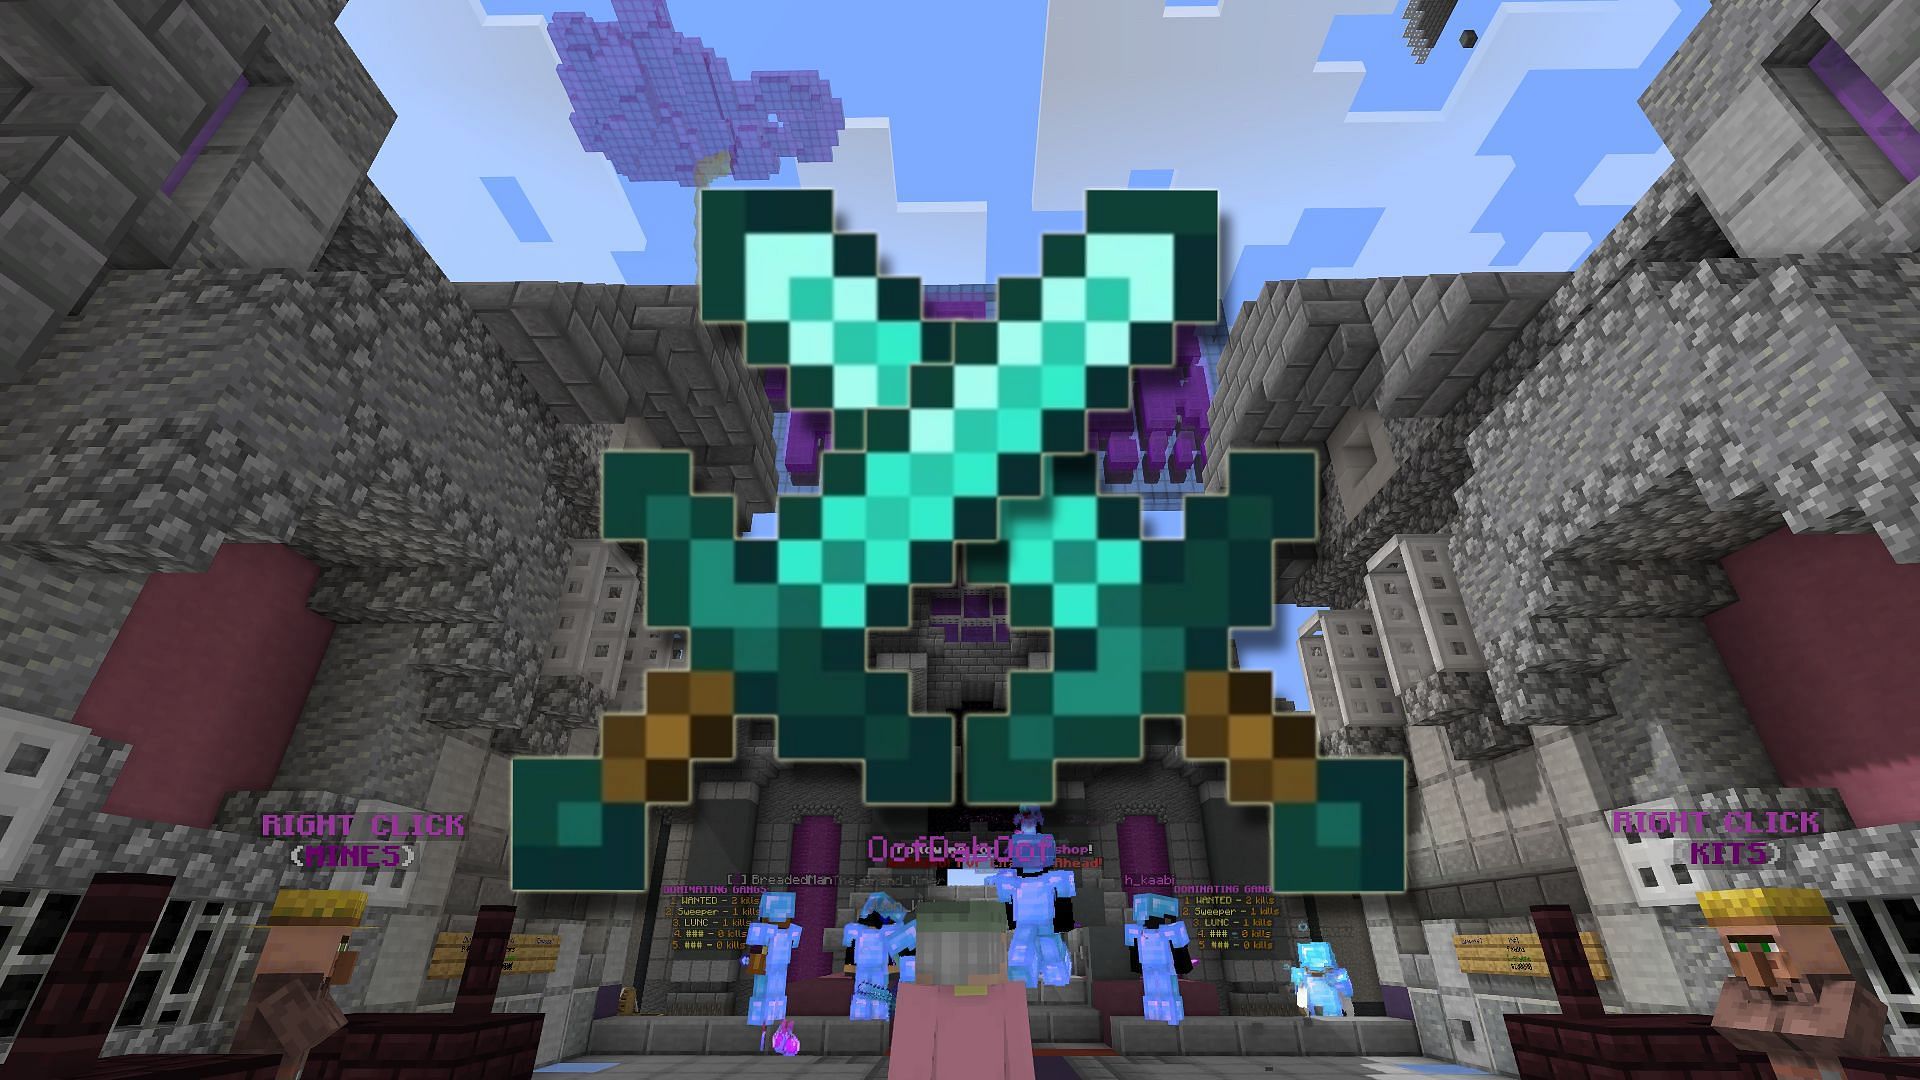 Two swords crossed over the spawn area of a server (Image via Minecraft)